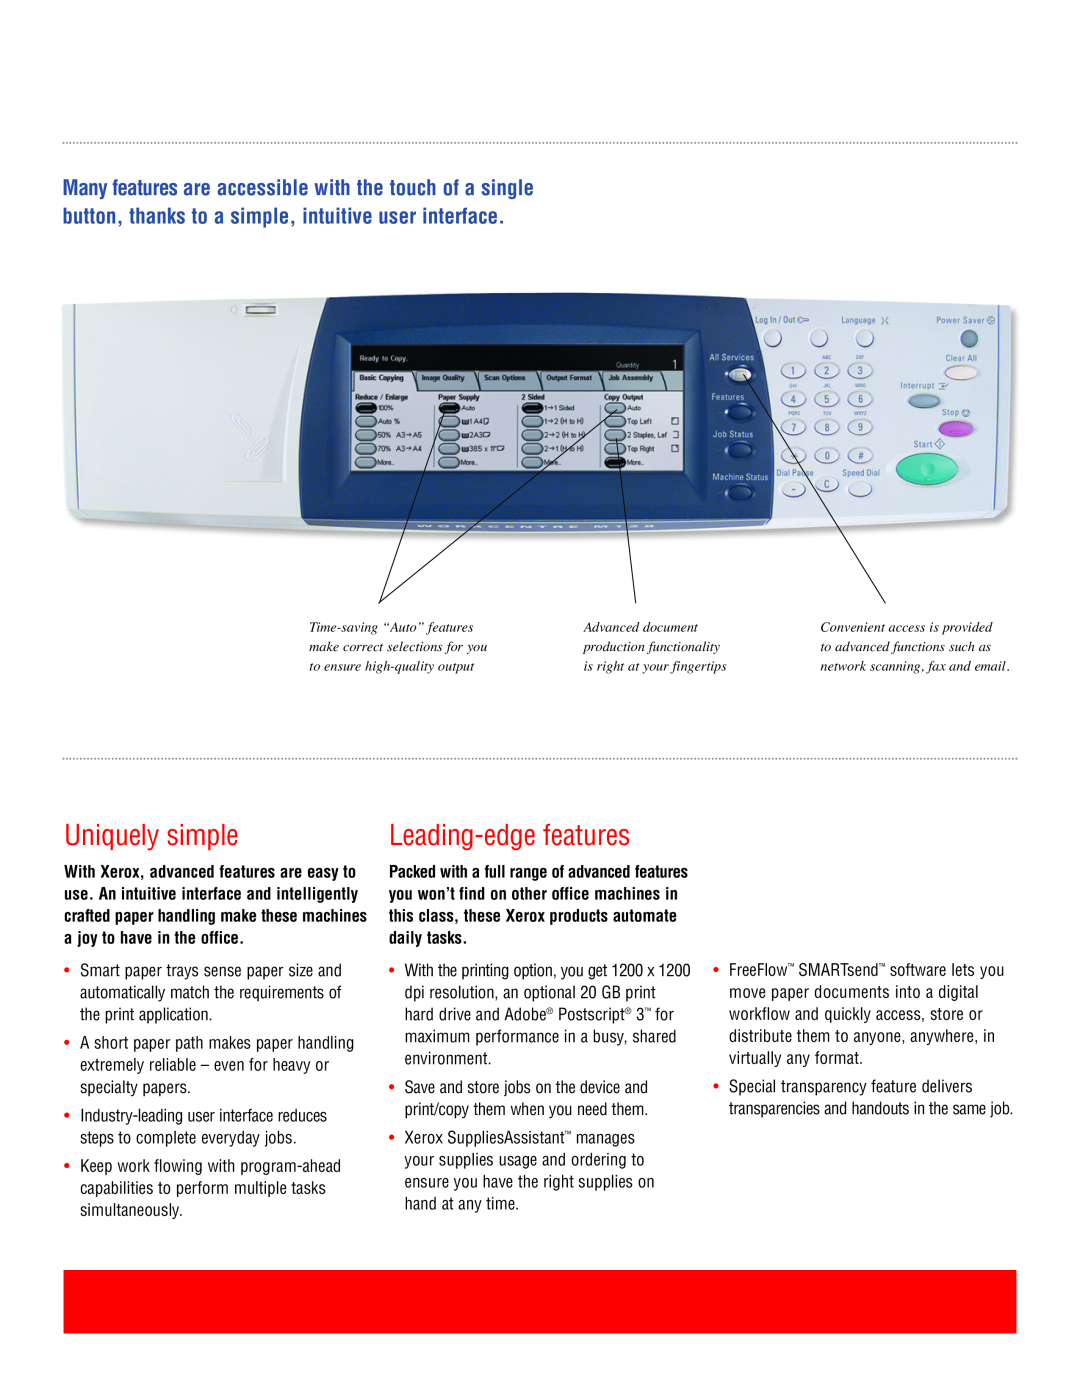 Xerox 133 Uniquely simple, Leading-edge features, Time-saving “Auto” features, Advanced document, production functionality 